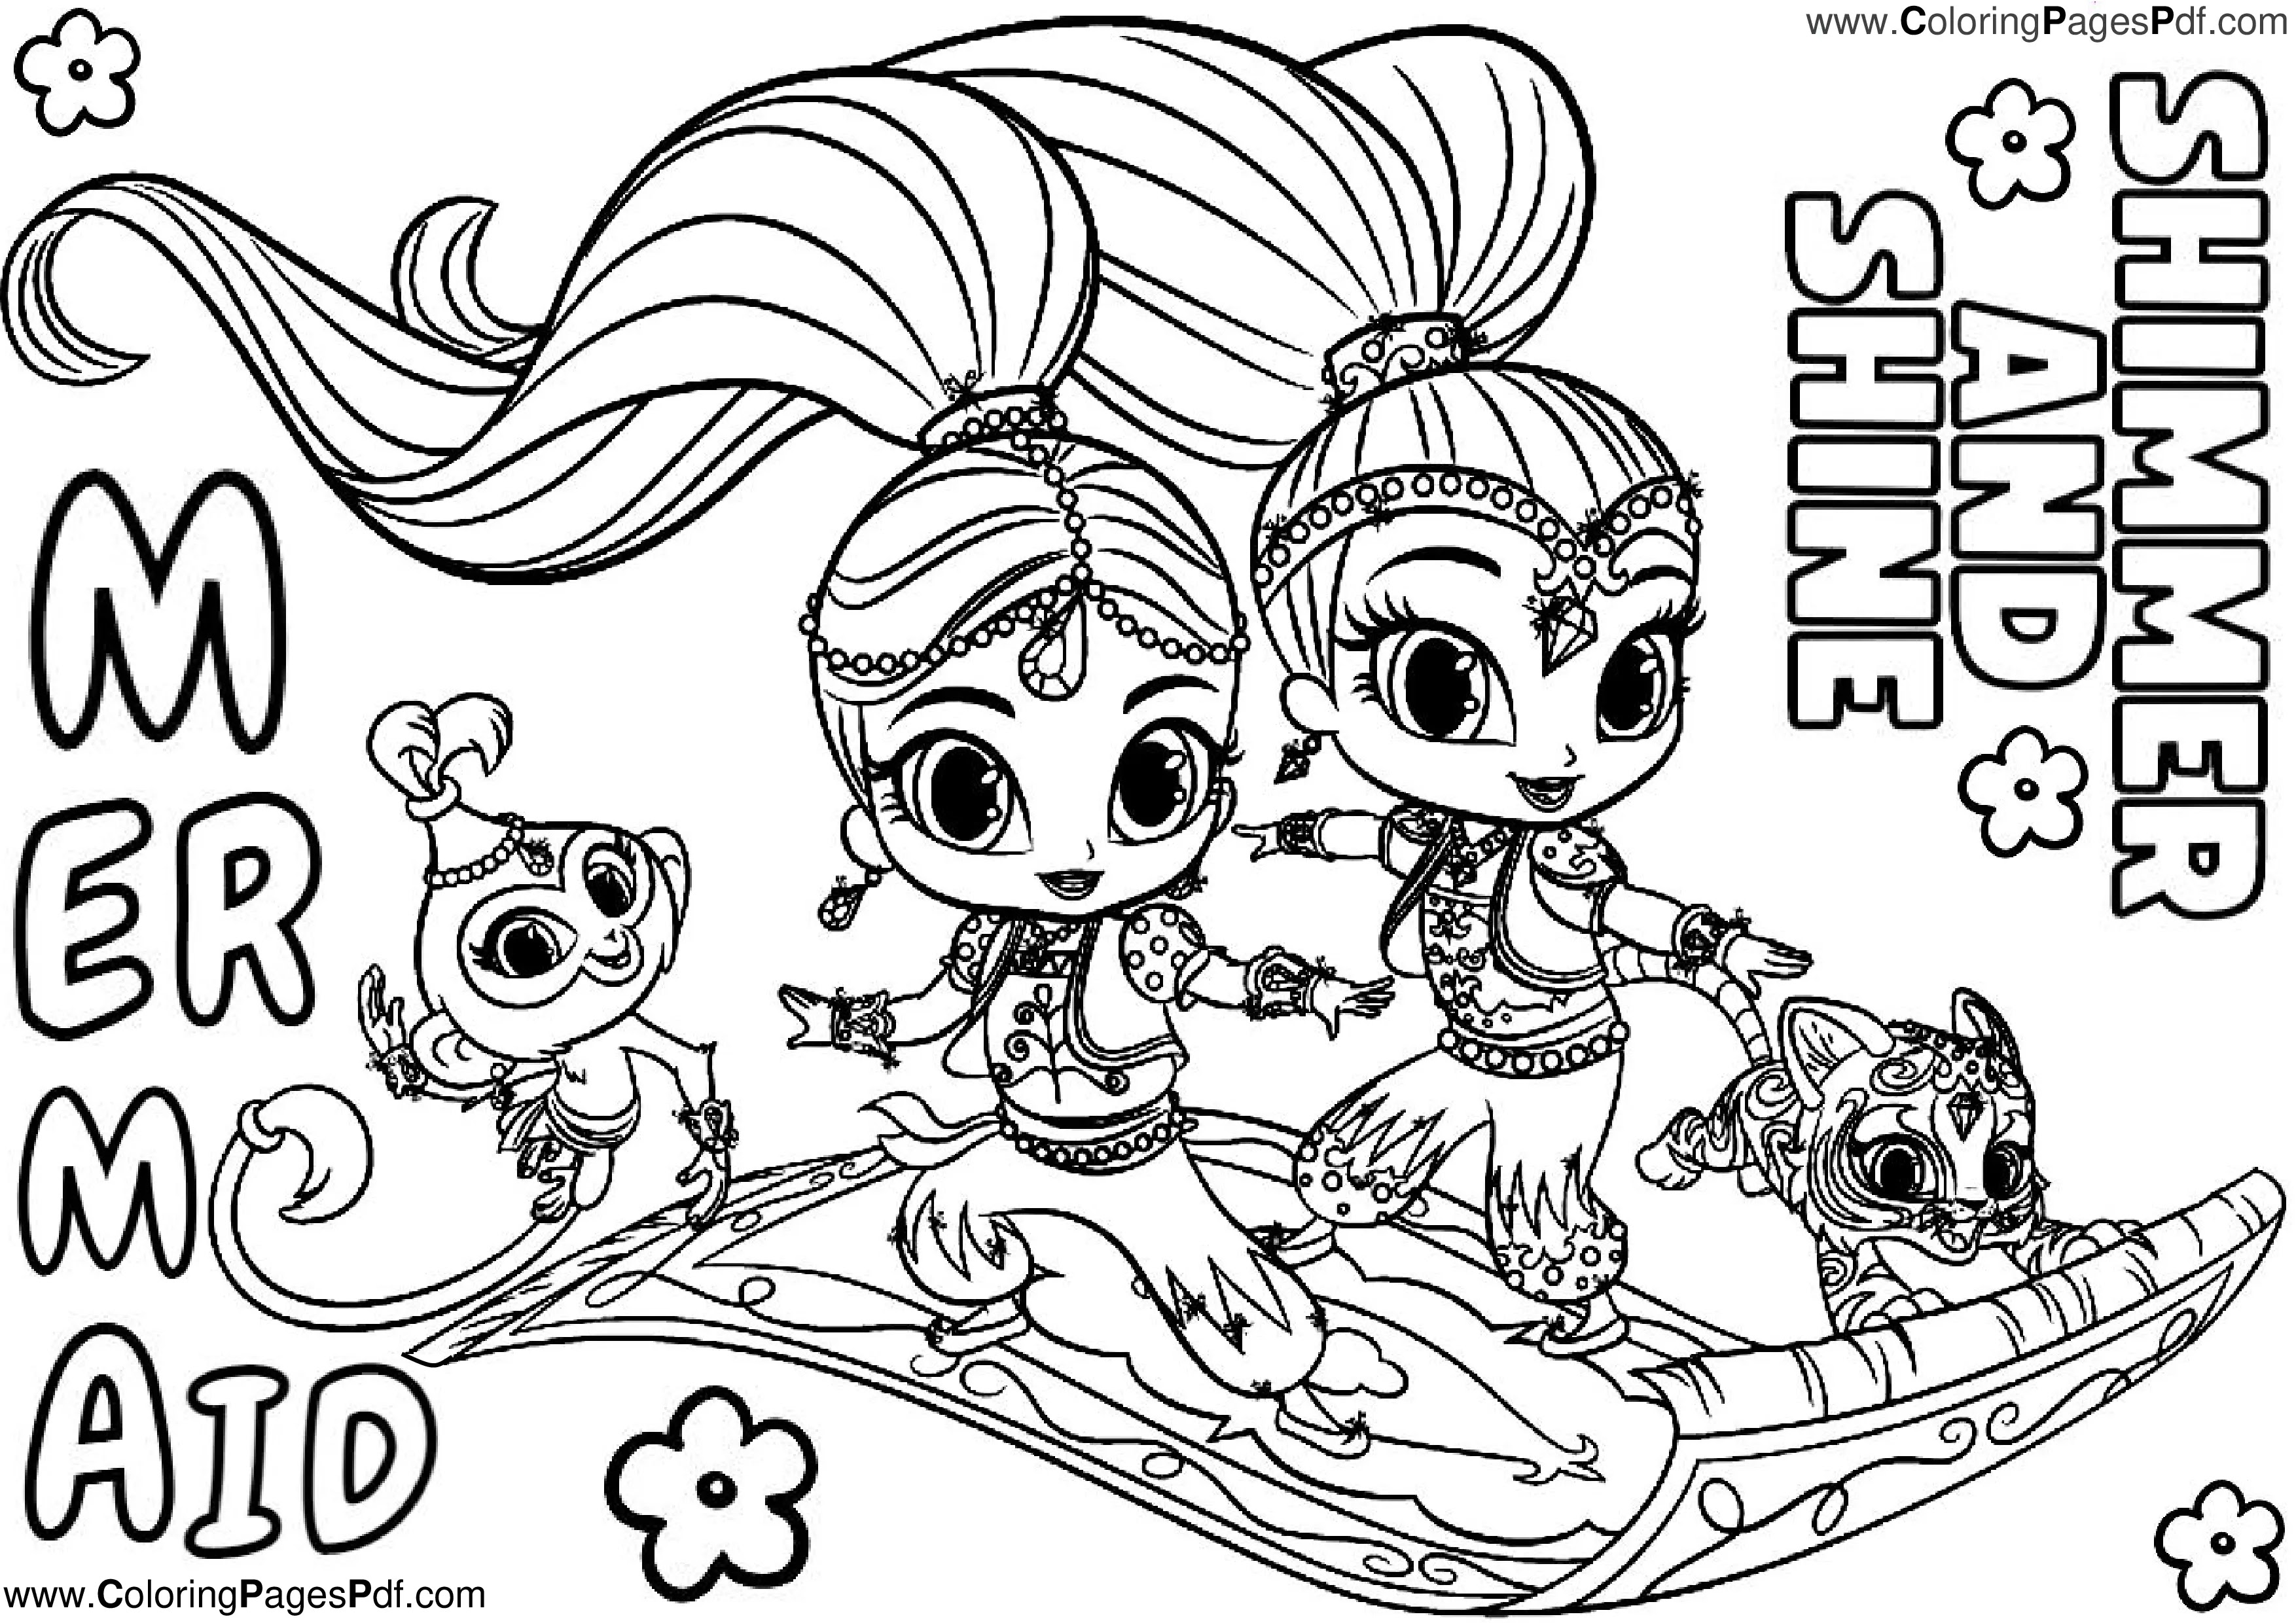 Shimmer and shine mermaid coloring pages